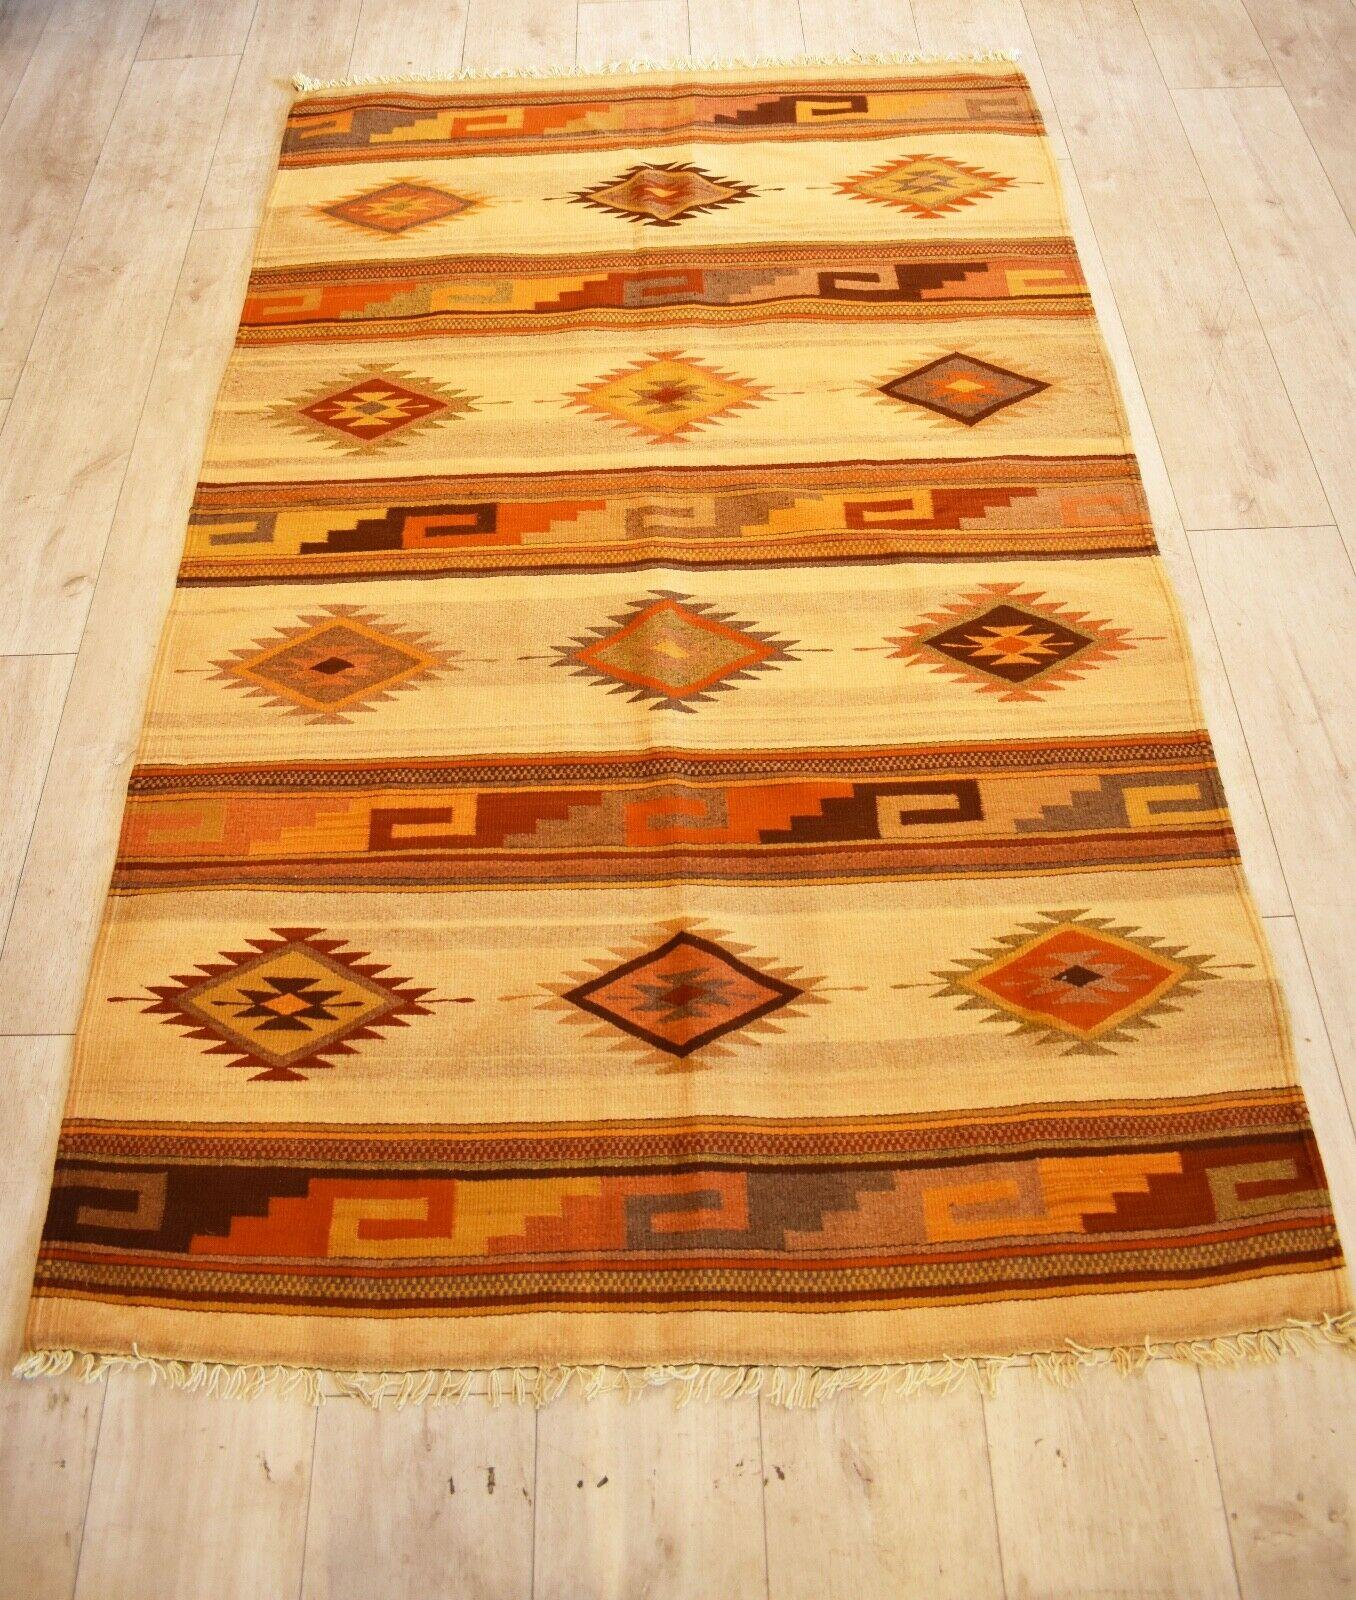 Very rare and unusual beautiful handwoven vintage Kilim runner
with Classic Indian Tribal patterns in shades of
Earthy brown, orange, green, orange & black on a straw coloured background
with a beautiful tasseled edges.
Handwoven with natural